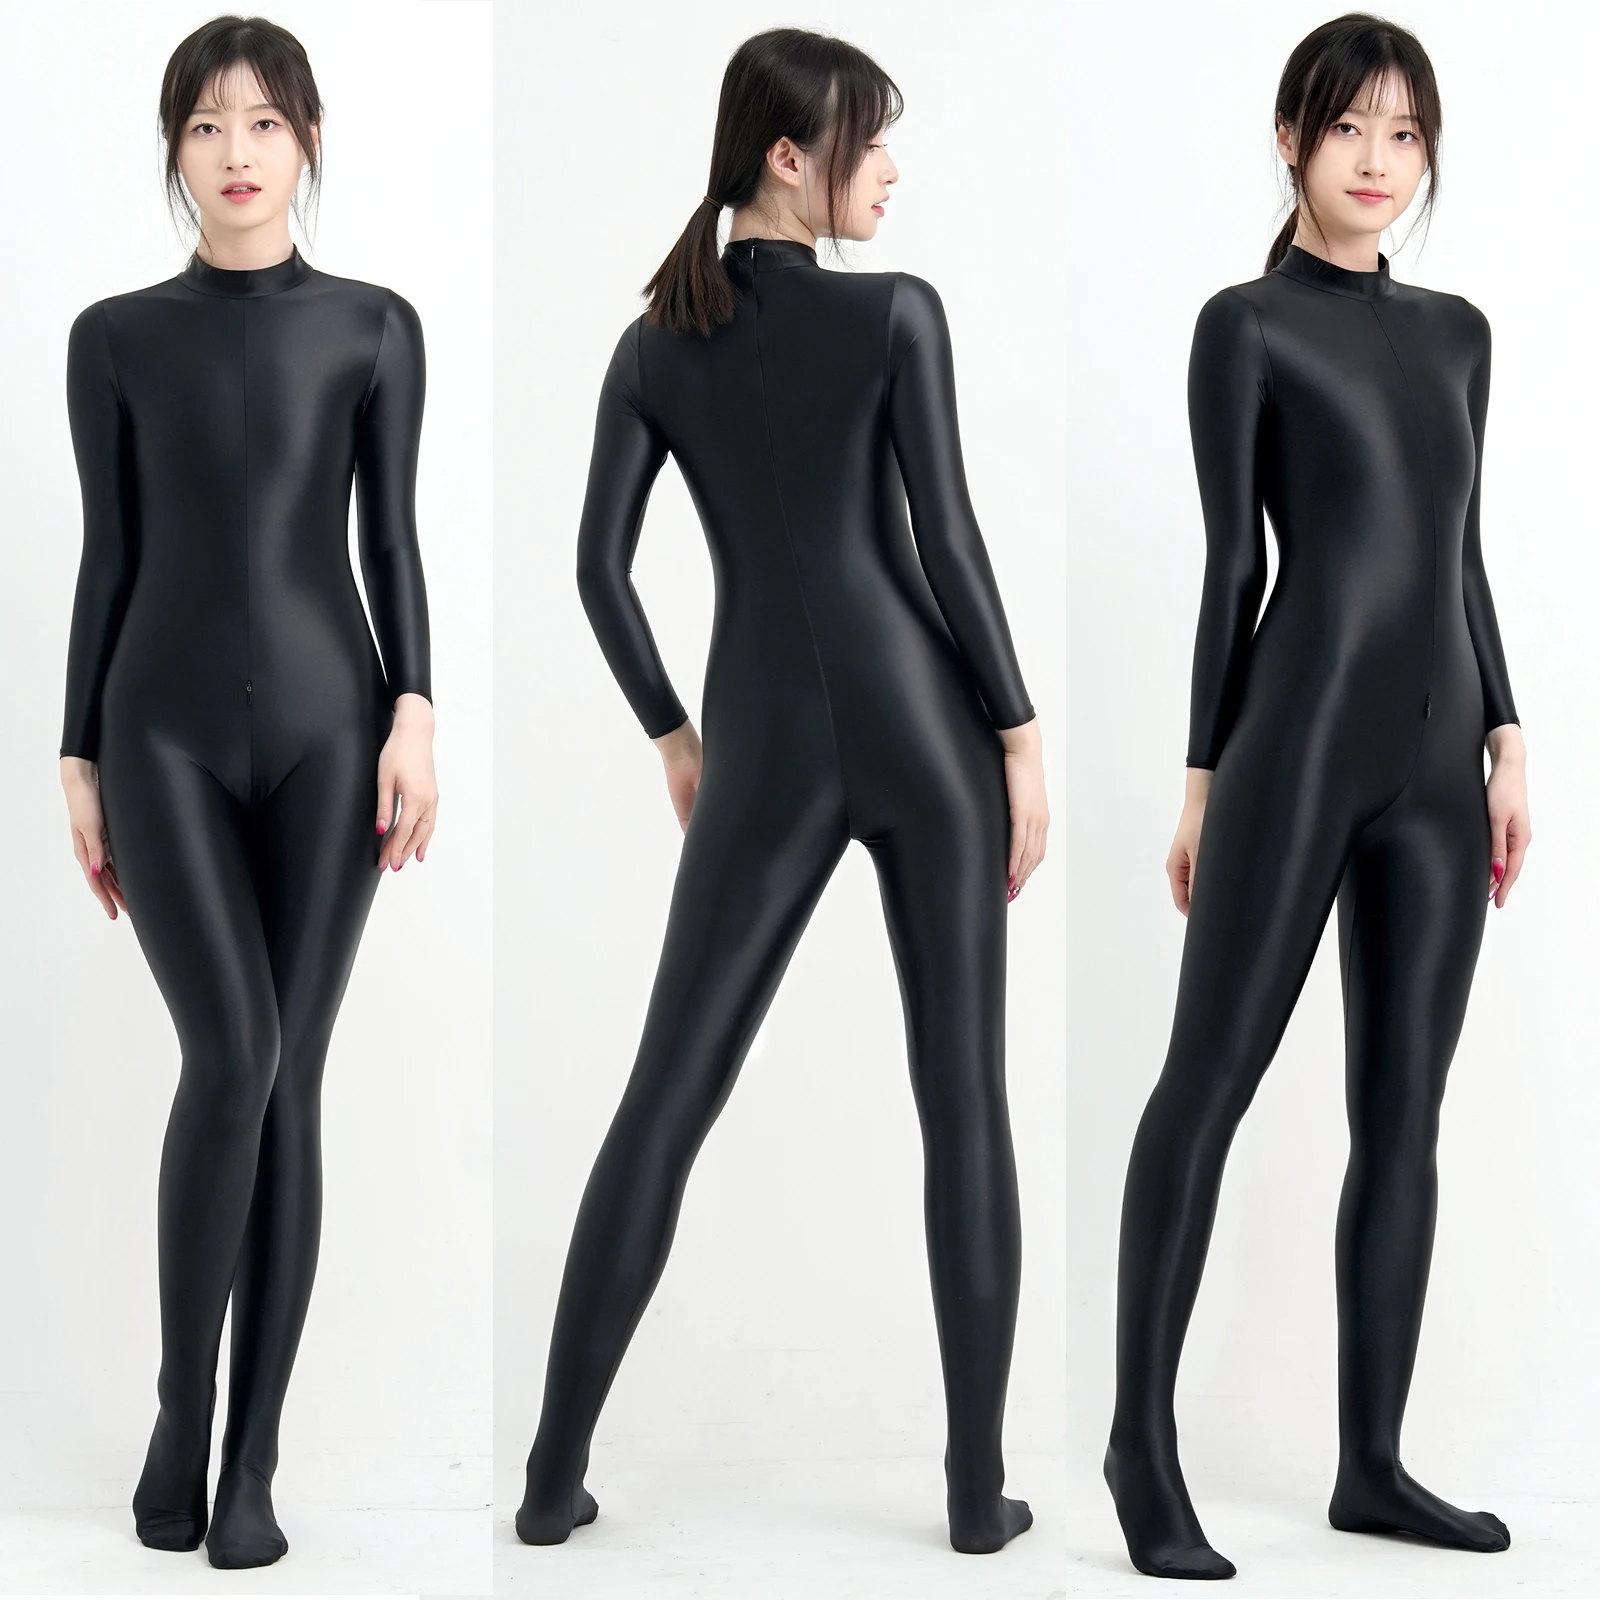 

Women Sexy Shiny Bodysuit Tight-fitting Oil Smooth Back Zipper Overalls Yoga Zentai Suits Casual Sport Tights Catsuit Jumpsuits